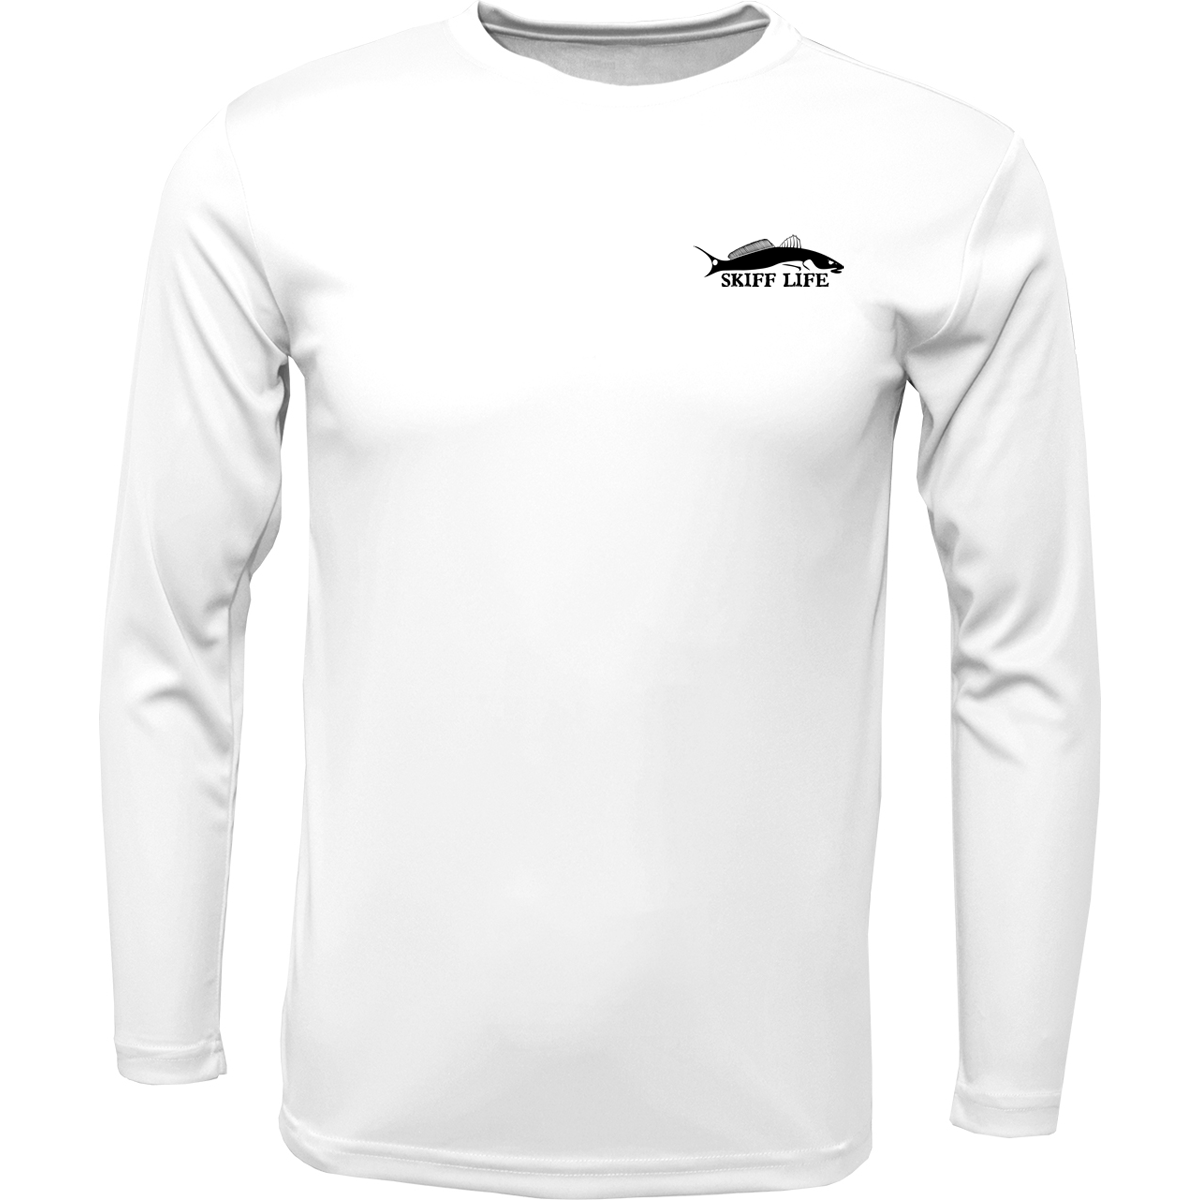 Snook Scarface Say Hello To My Little Friend Mens Fishing Shirt - Skiff Life